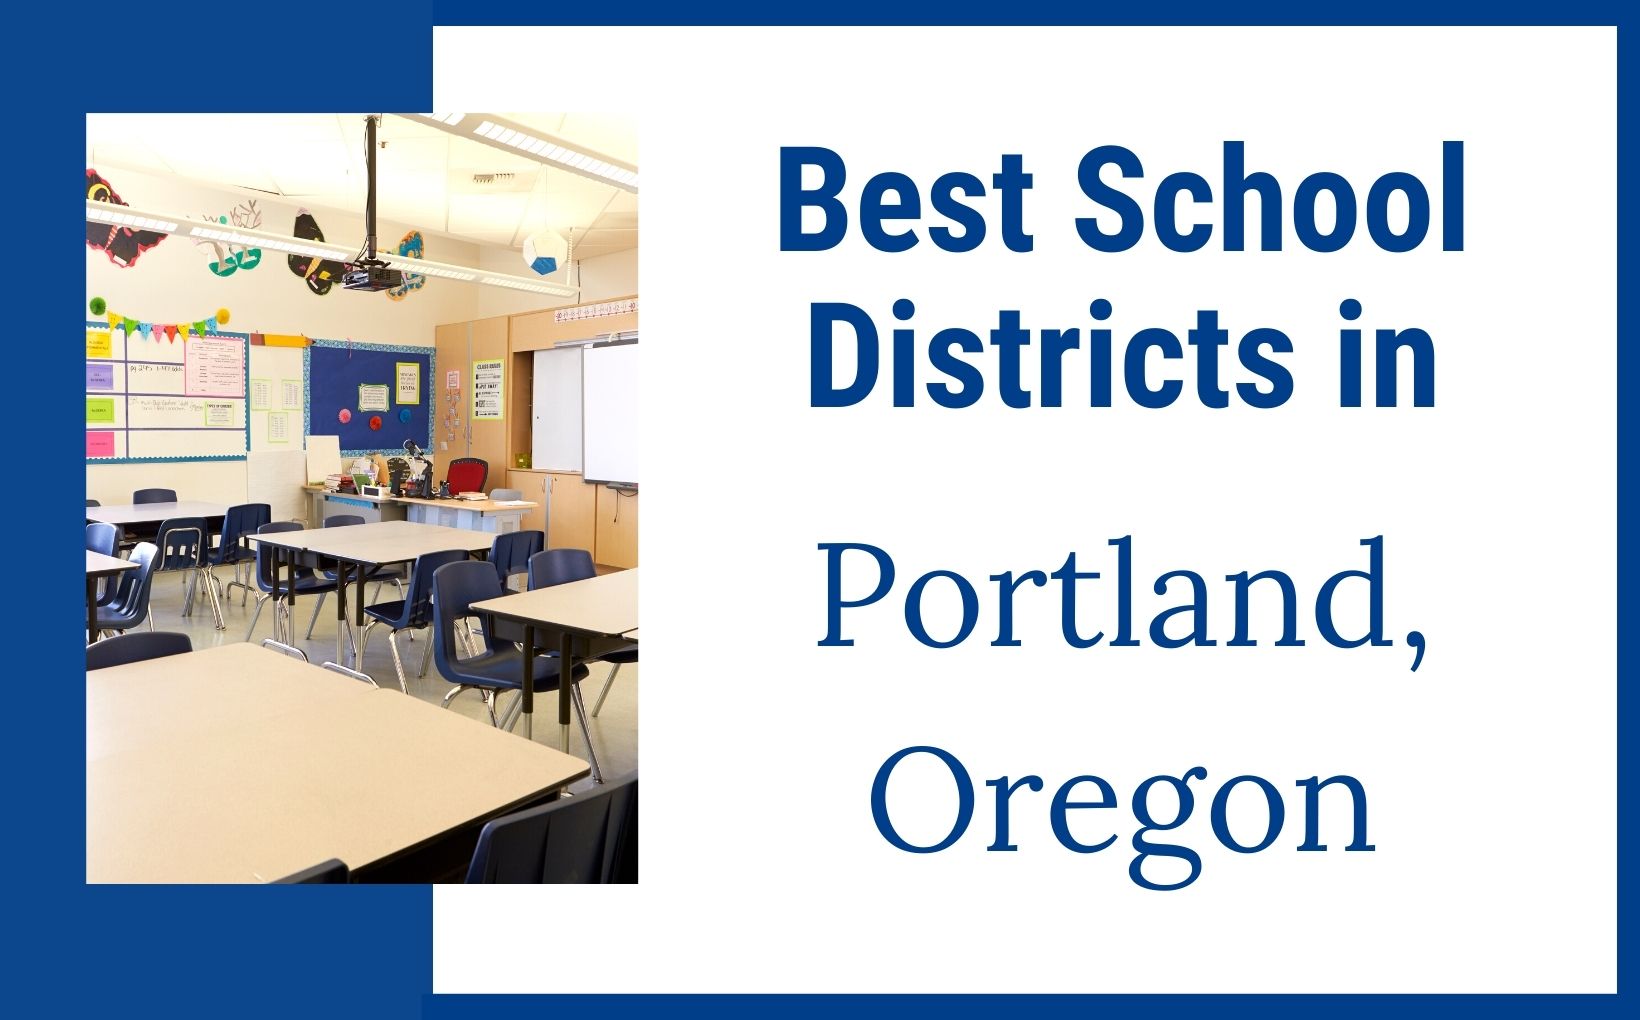 Best Schools Districts to live in Portland, feature image